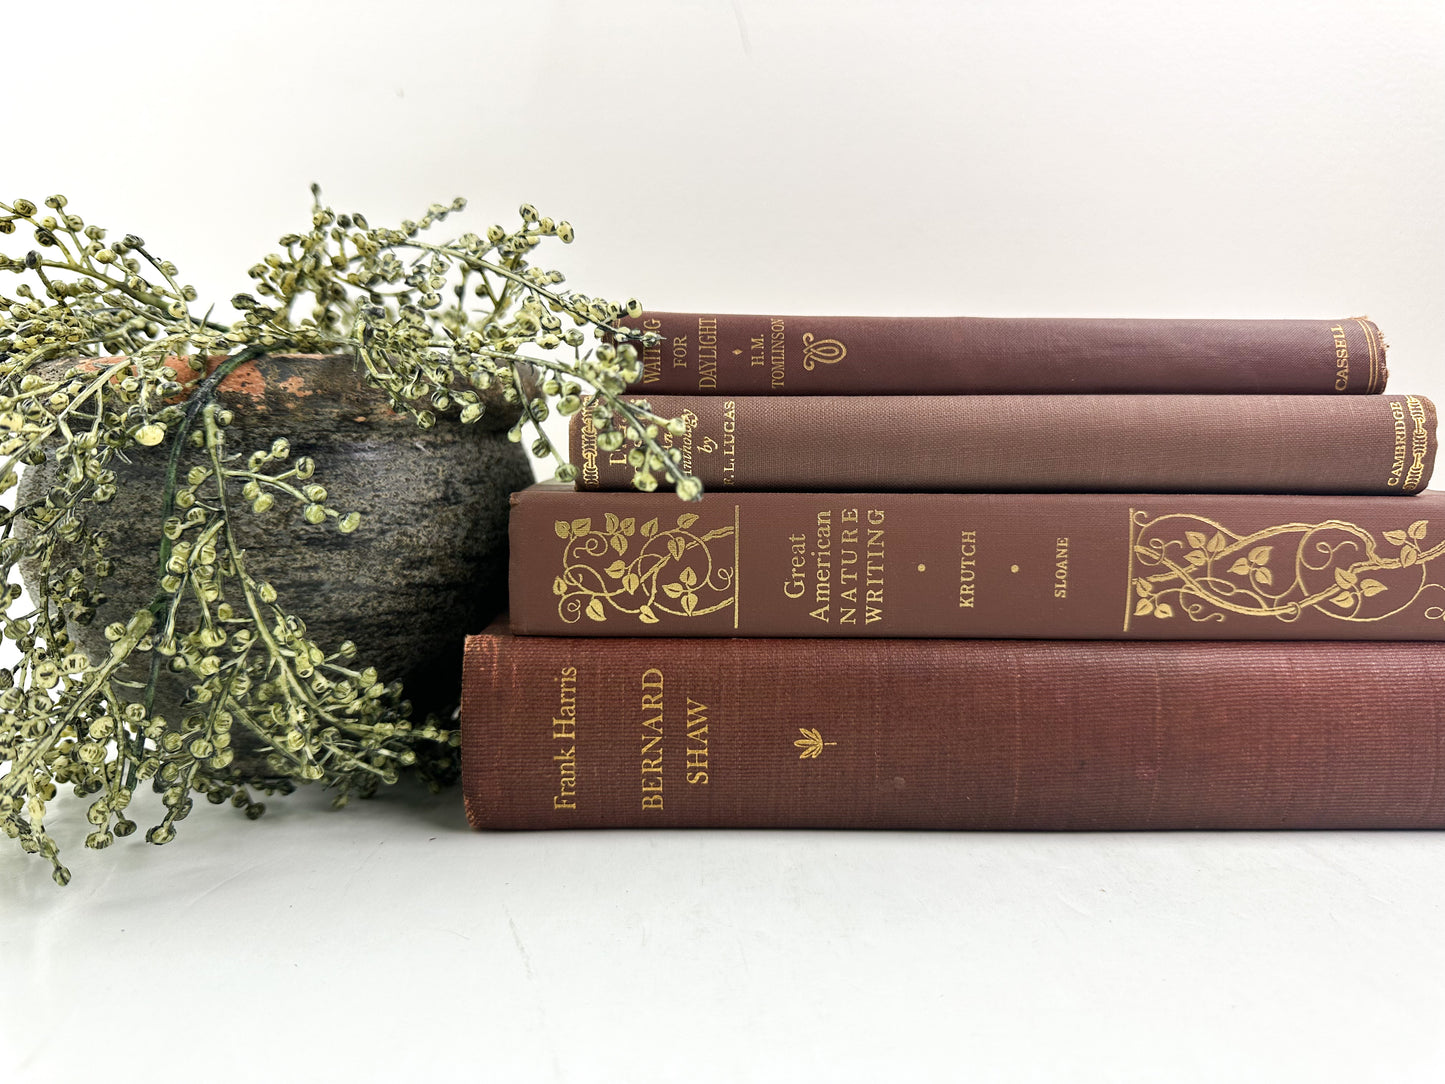 Classic Red Books for Decor